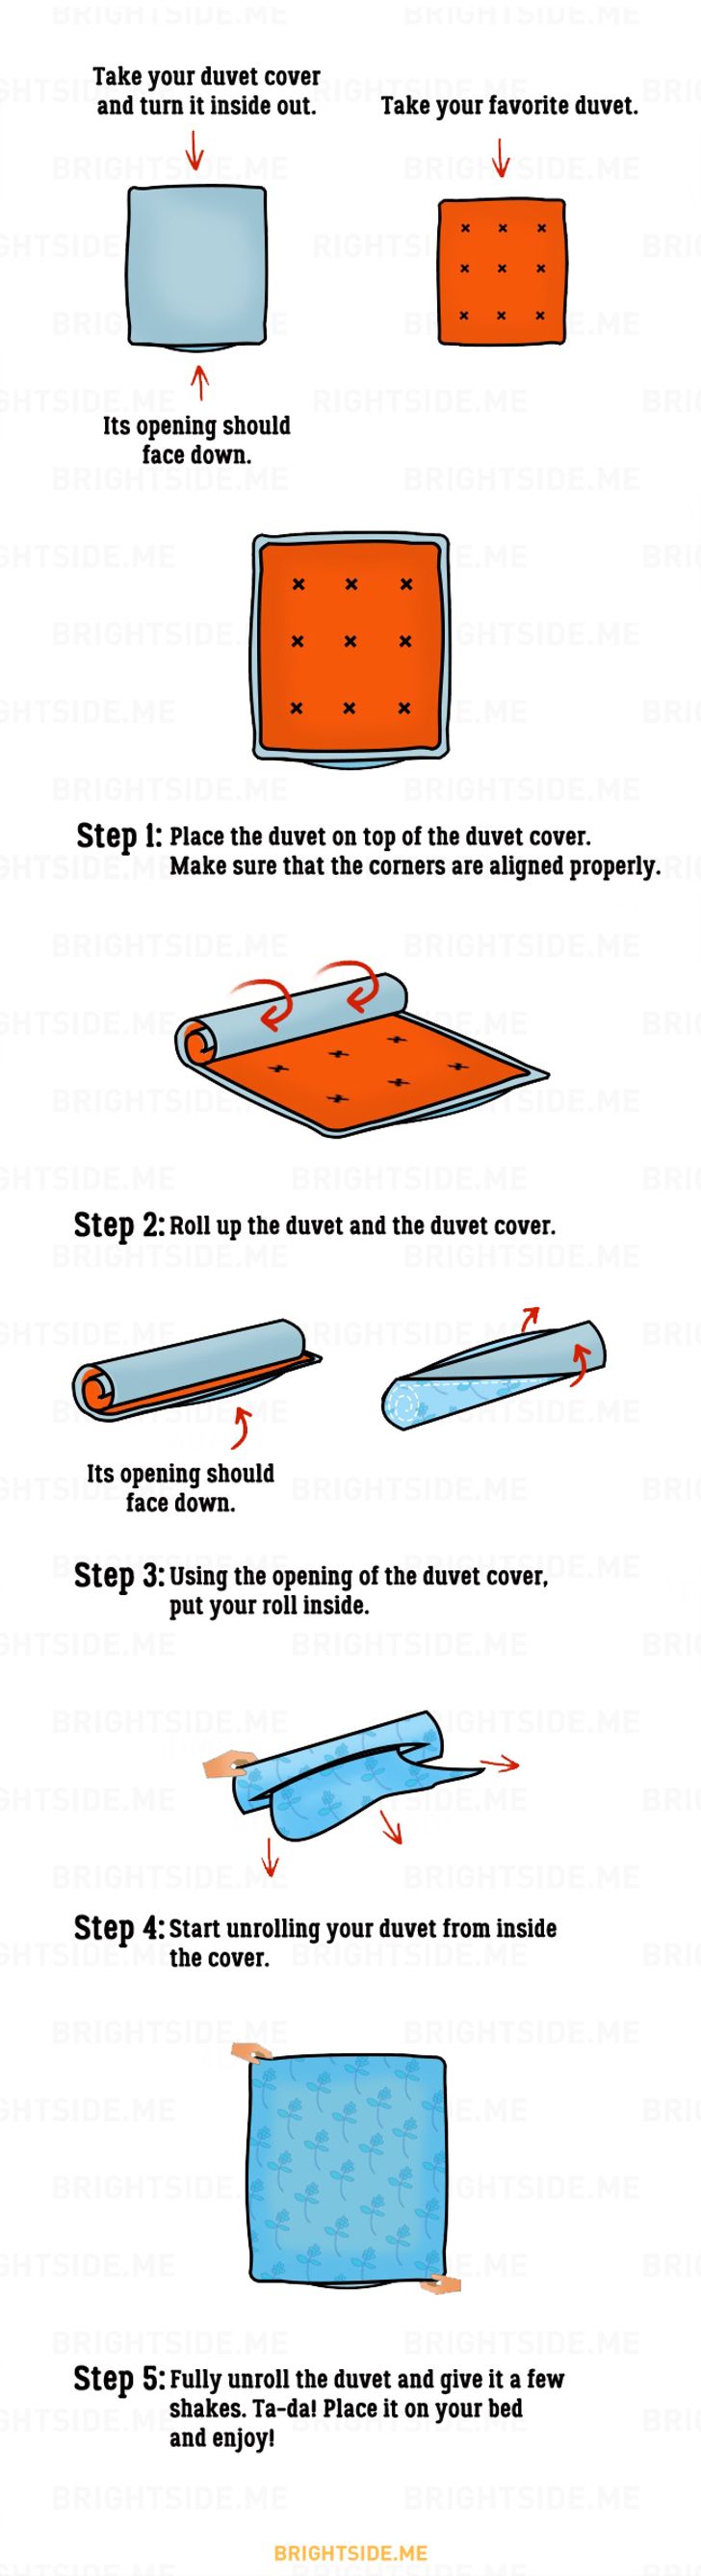 A Duvet Cover, What Do You Use A Duvet Cover For